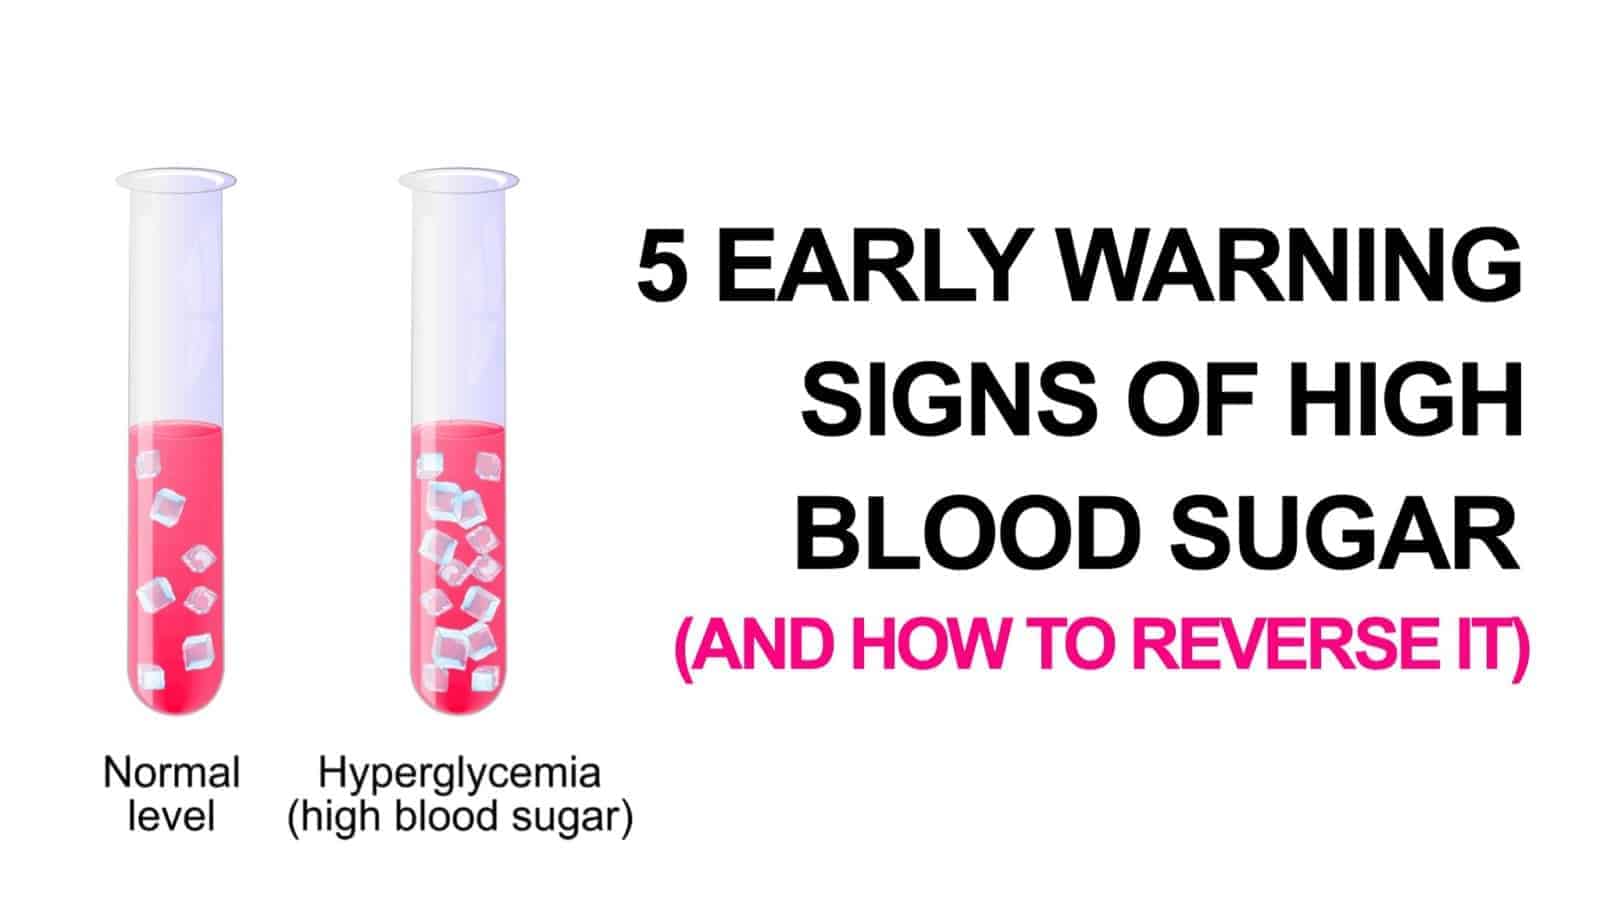 5 Early Warning Signs of High Blood Sugar (And How to Reverse It)